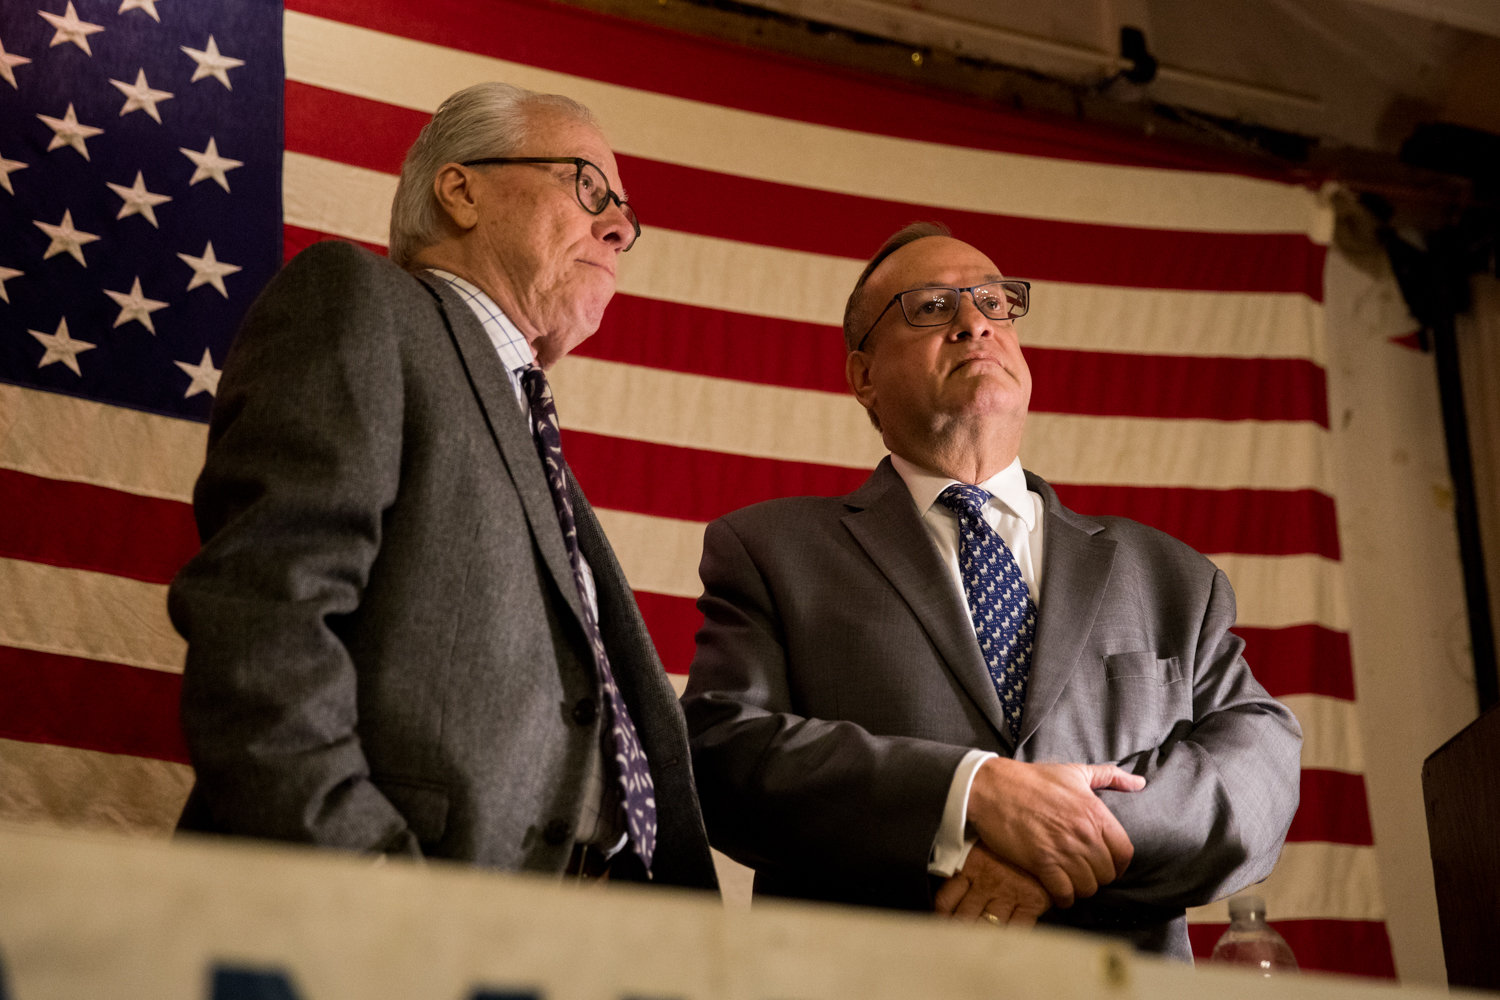 Benjamin Franklin Reform Democratic Club president Michael Heller, right, and vice president Bruce Feld preside over the club’s annual meeting. Despite facing unexpected challengers to their positions, both men retained their spots in the club’s leadership election.